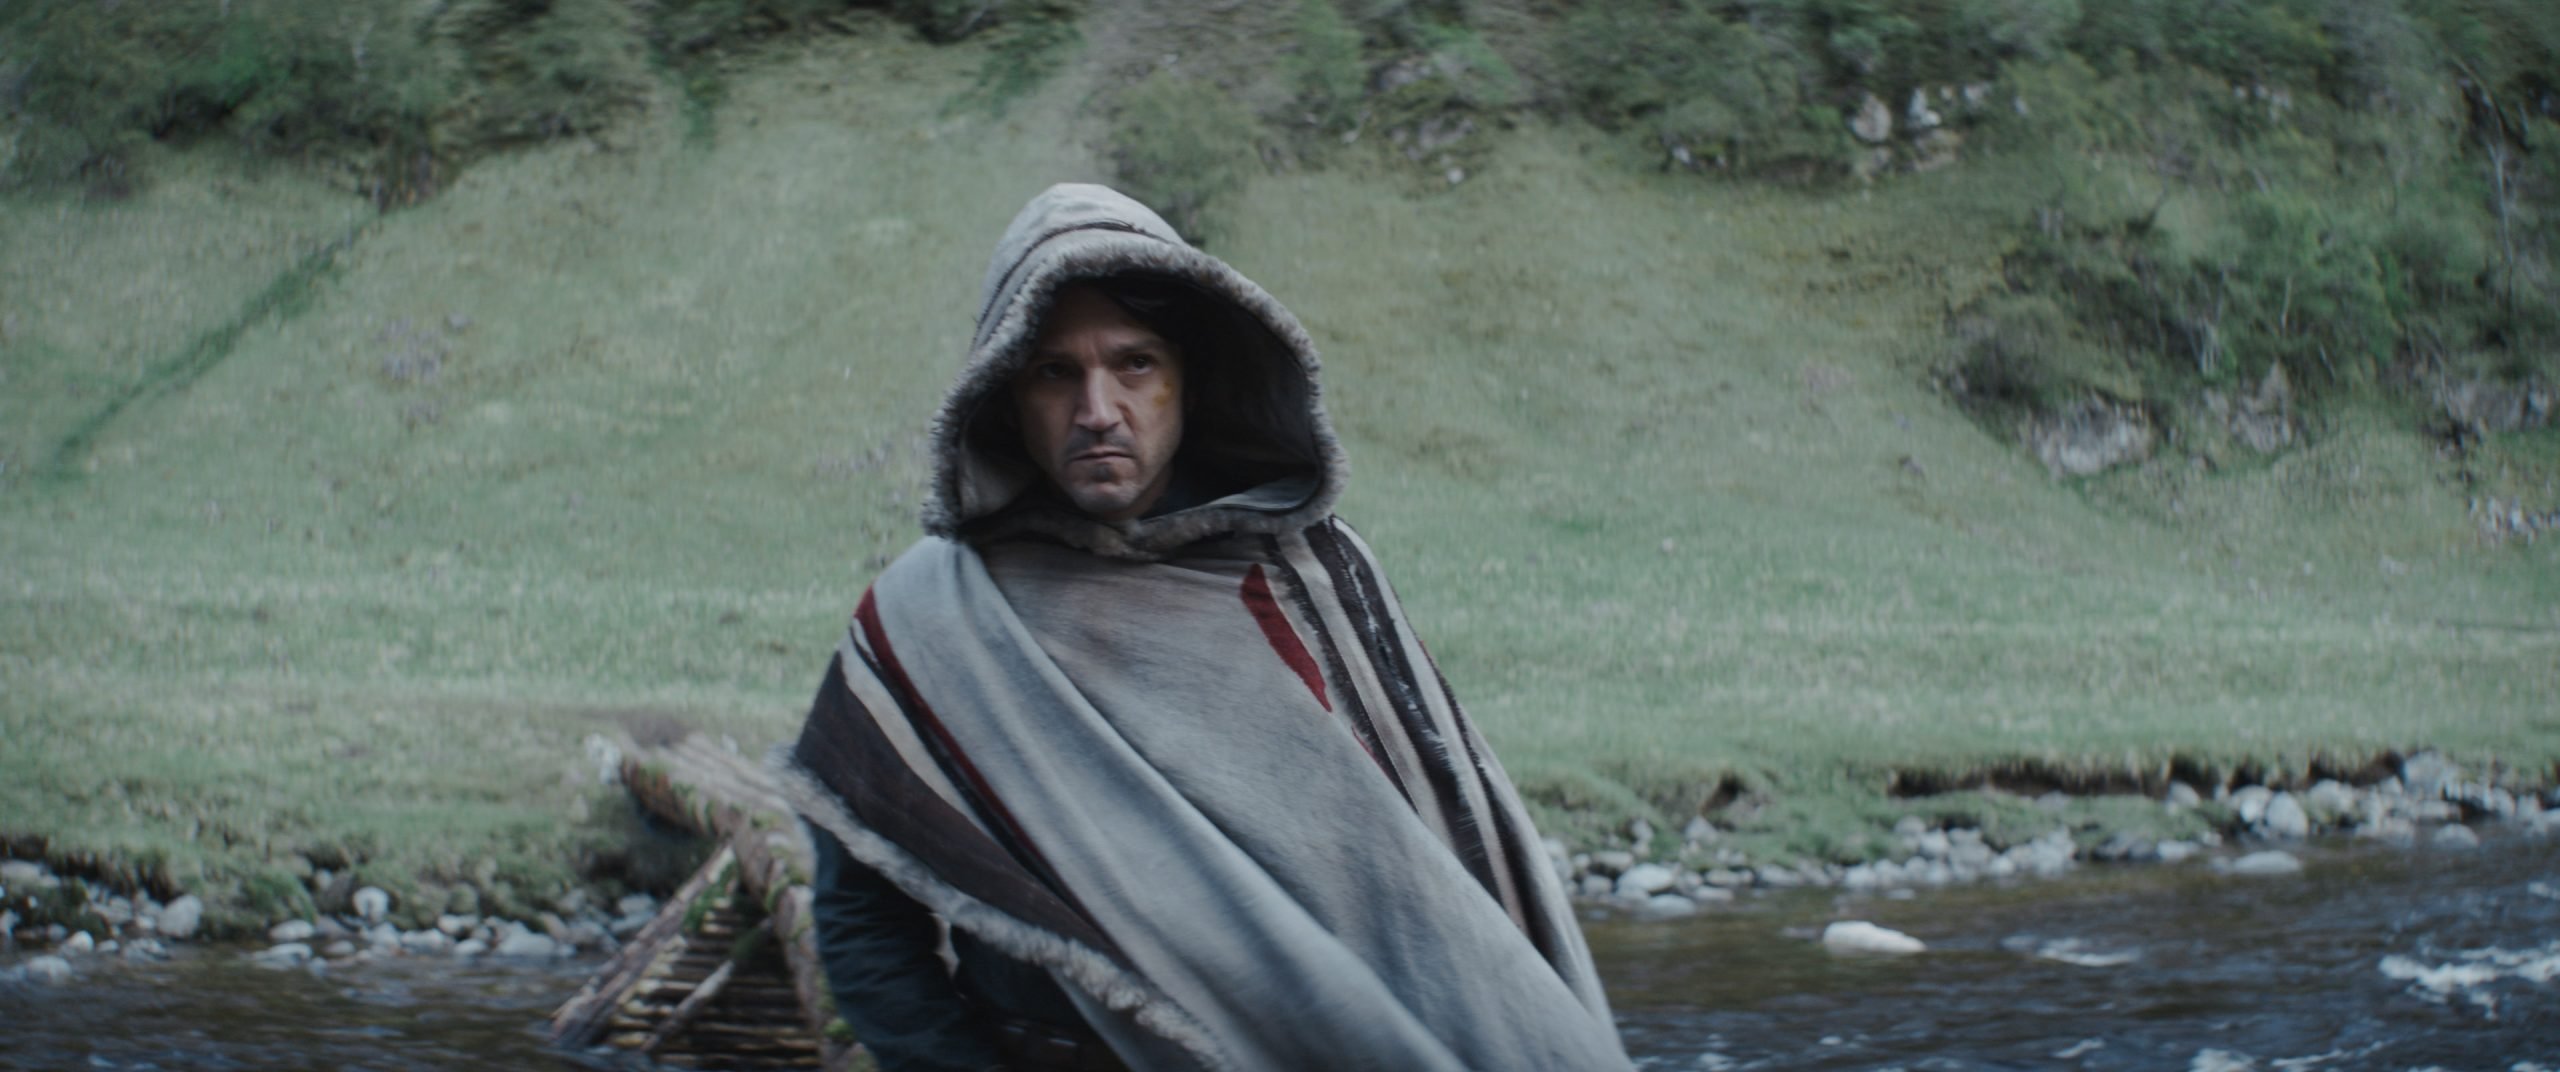 Cassian Andor cloaked